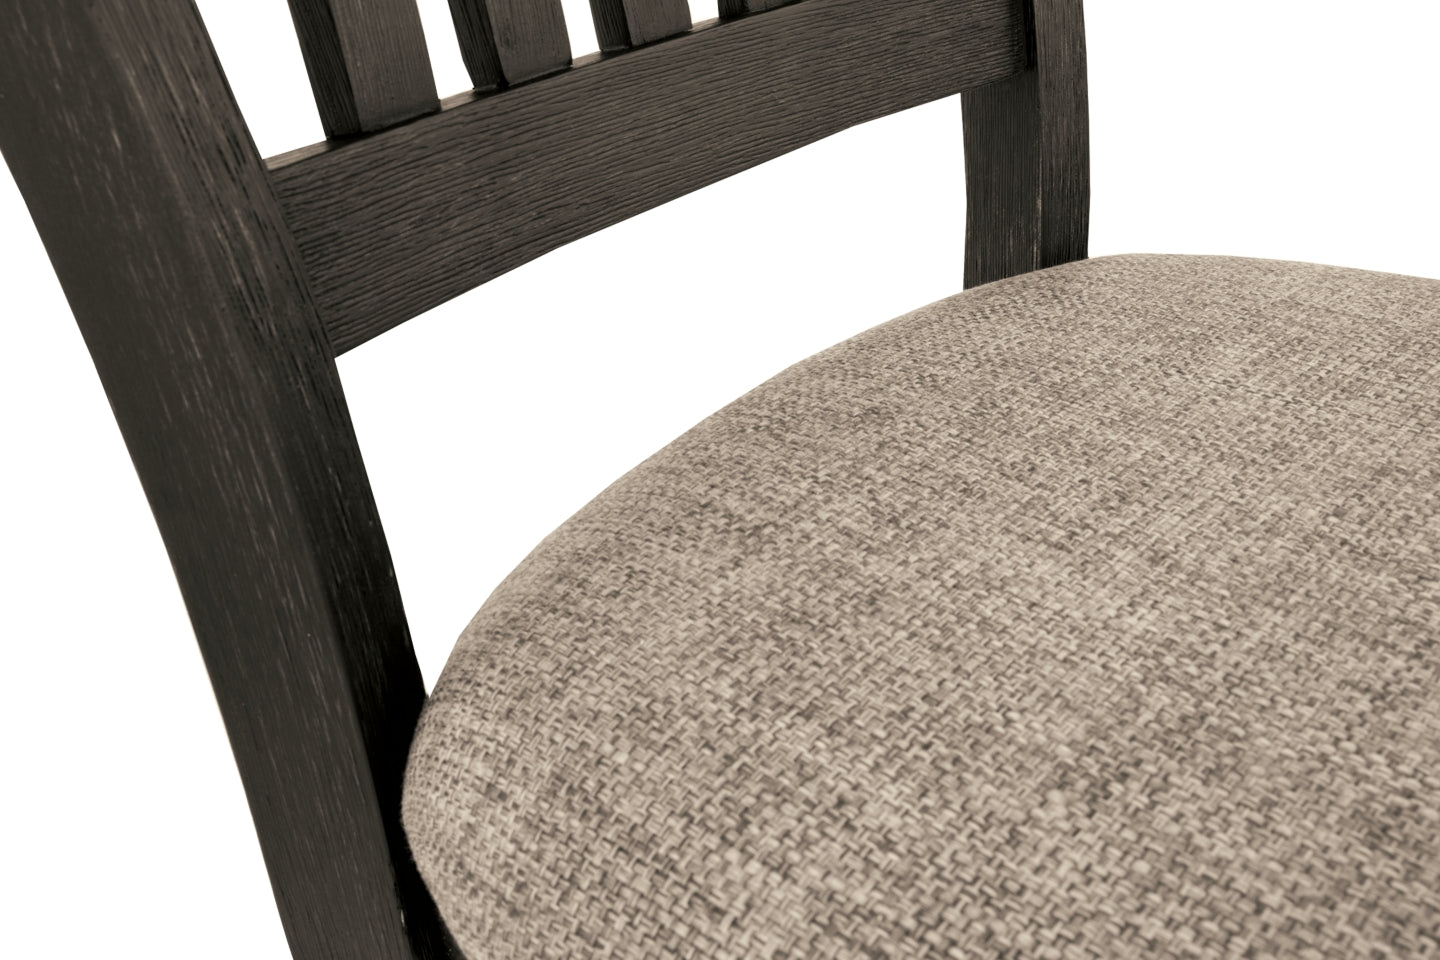 Tyler Creek Dining Chair - furniture place usa